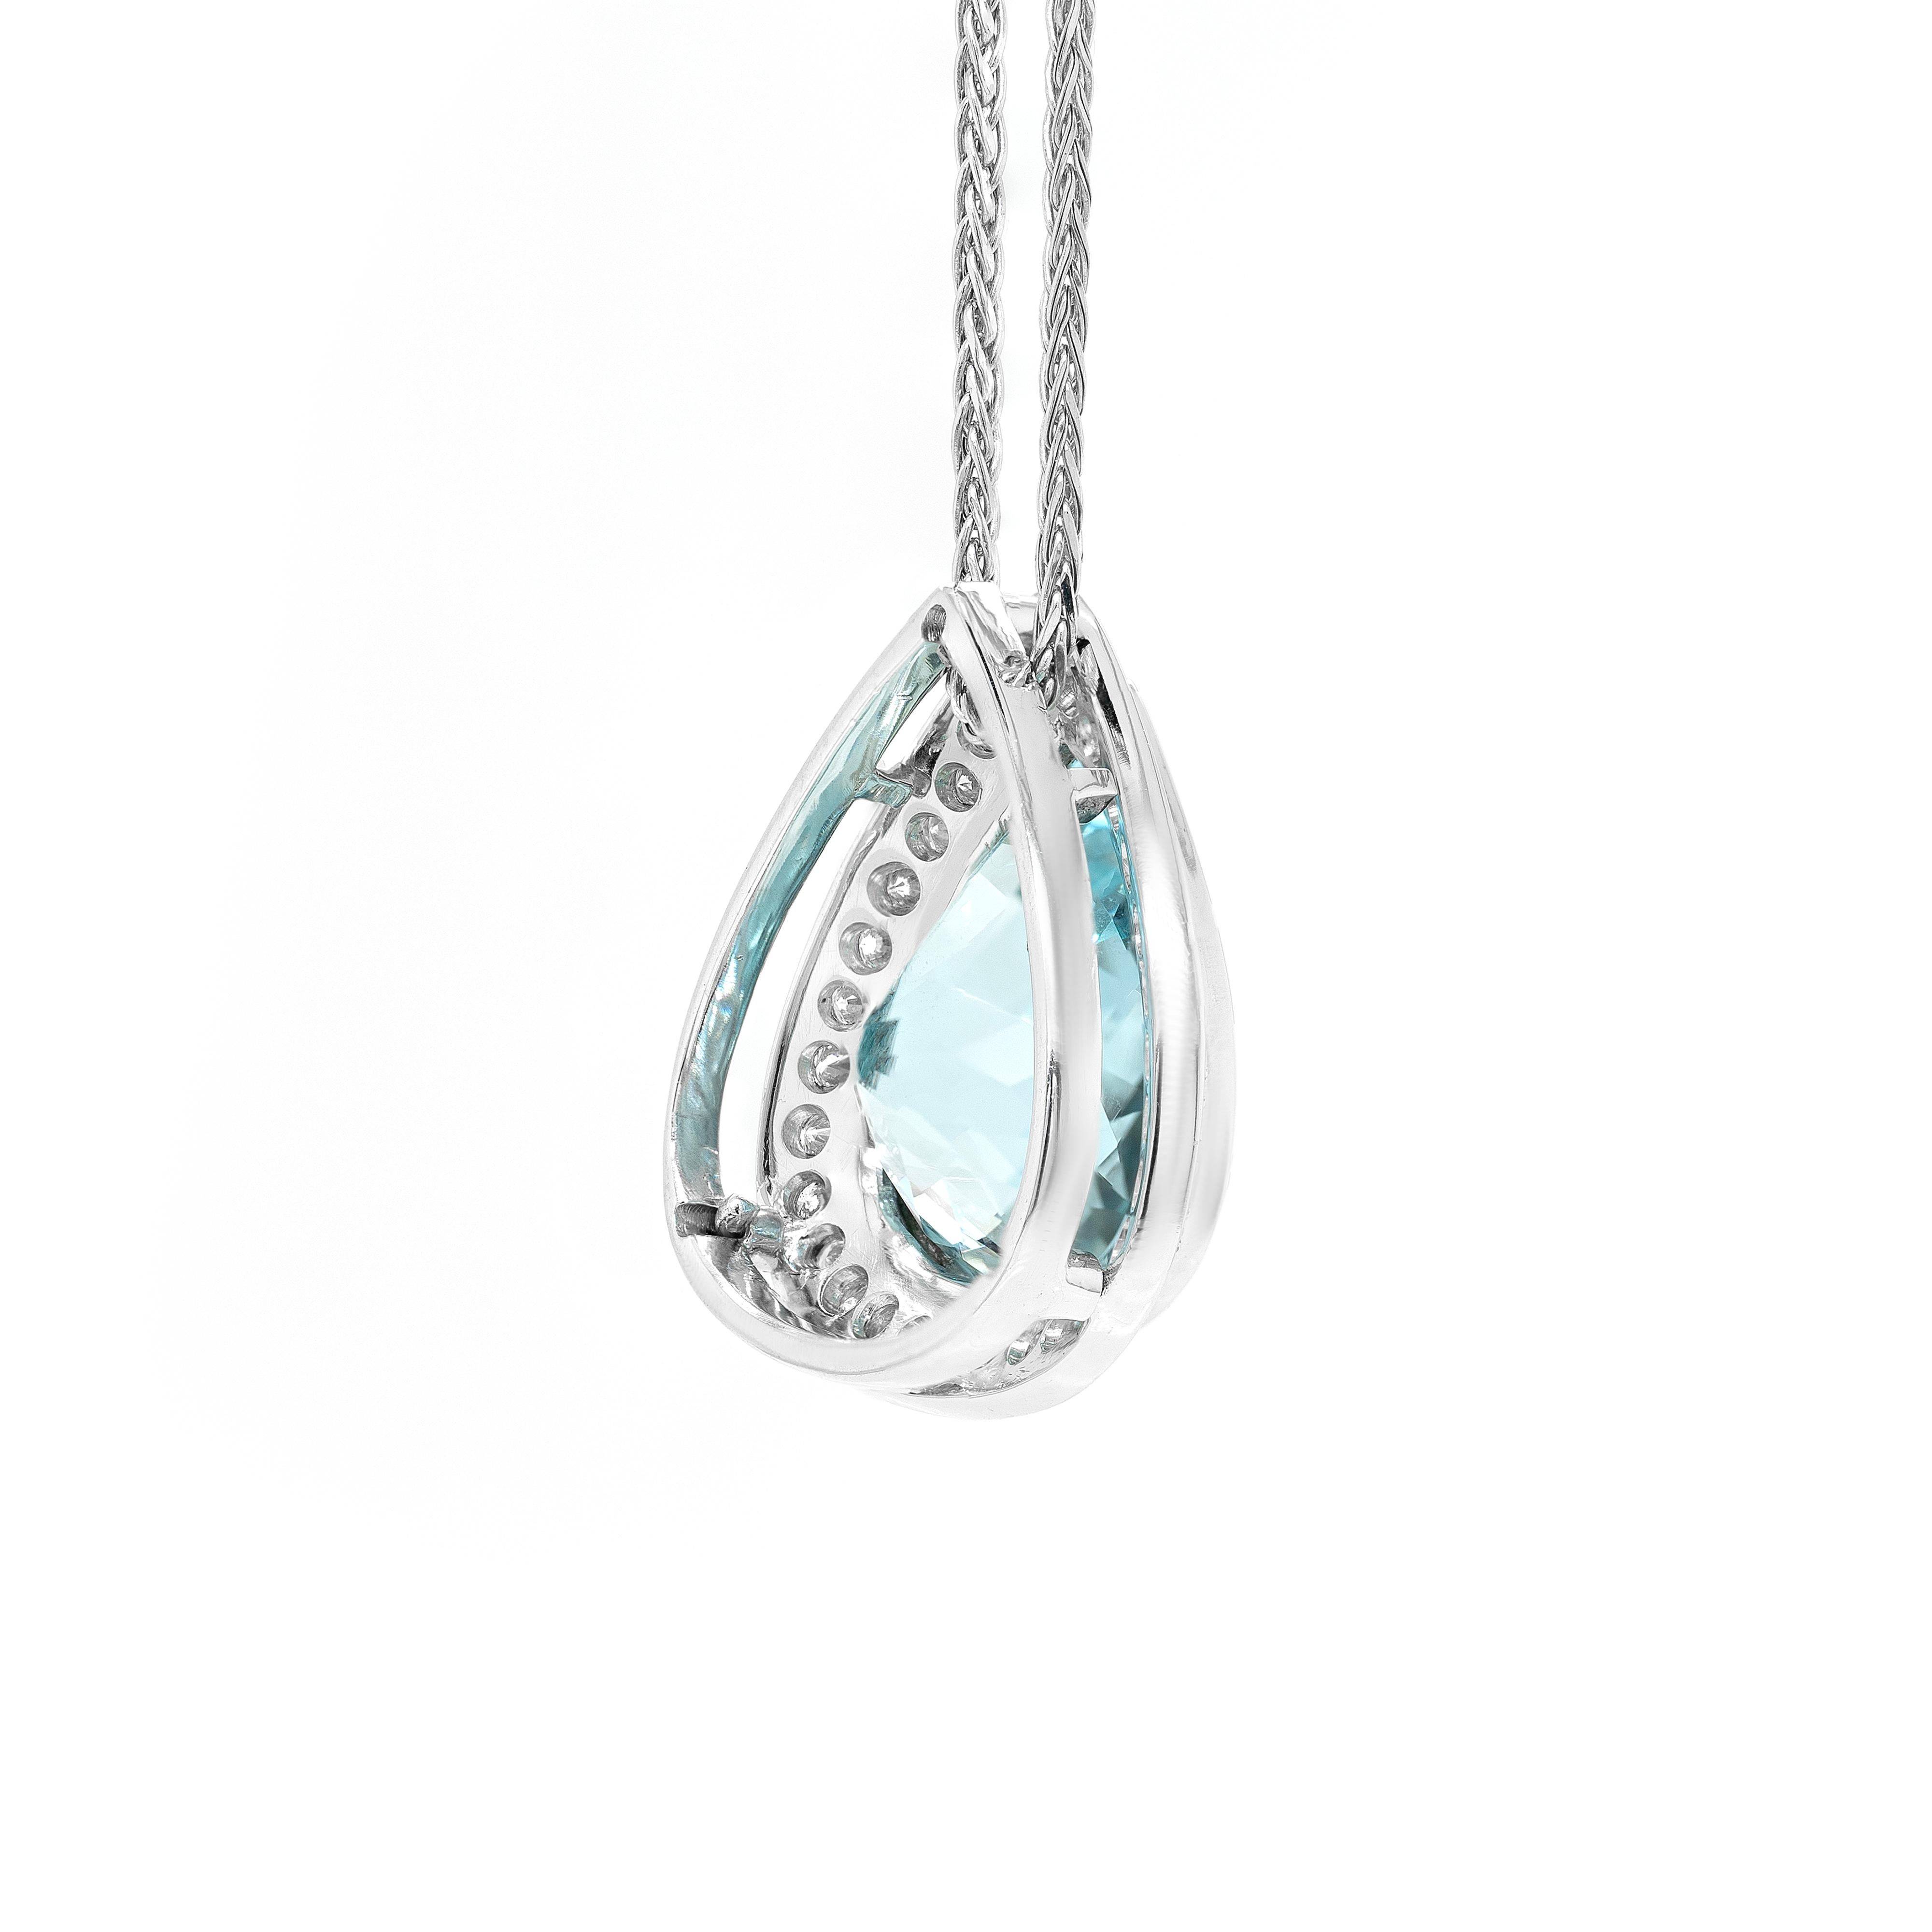 This gorgeous pendant features a wonderful pear shaped aquamarine weighing approximately 11.00ct, mounted in a rub-over, open back setting. The translucent gemstone is beautifully surrounded by a halo of 30 round brilliant cut diamonds weighing a